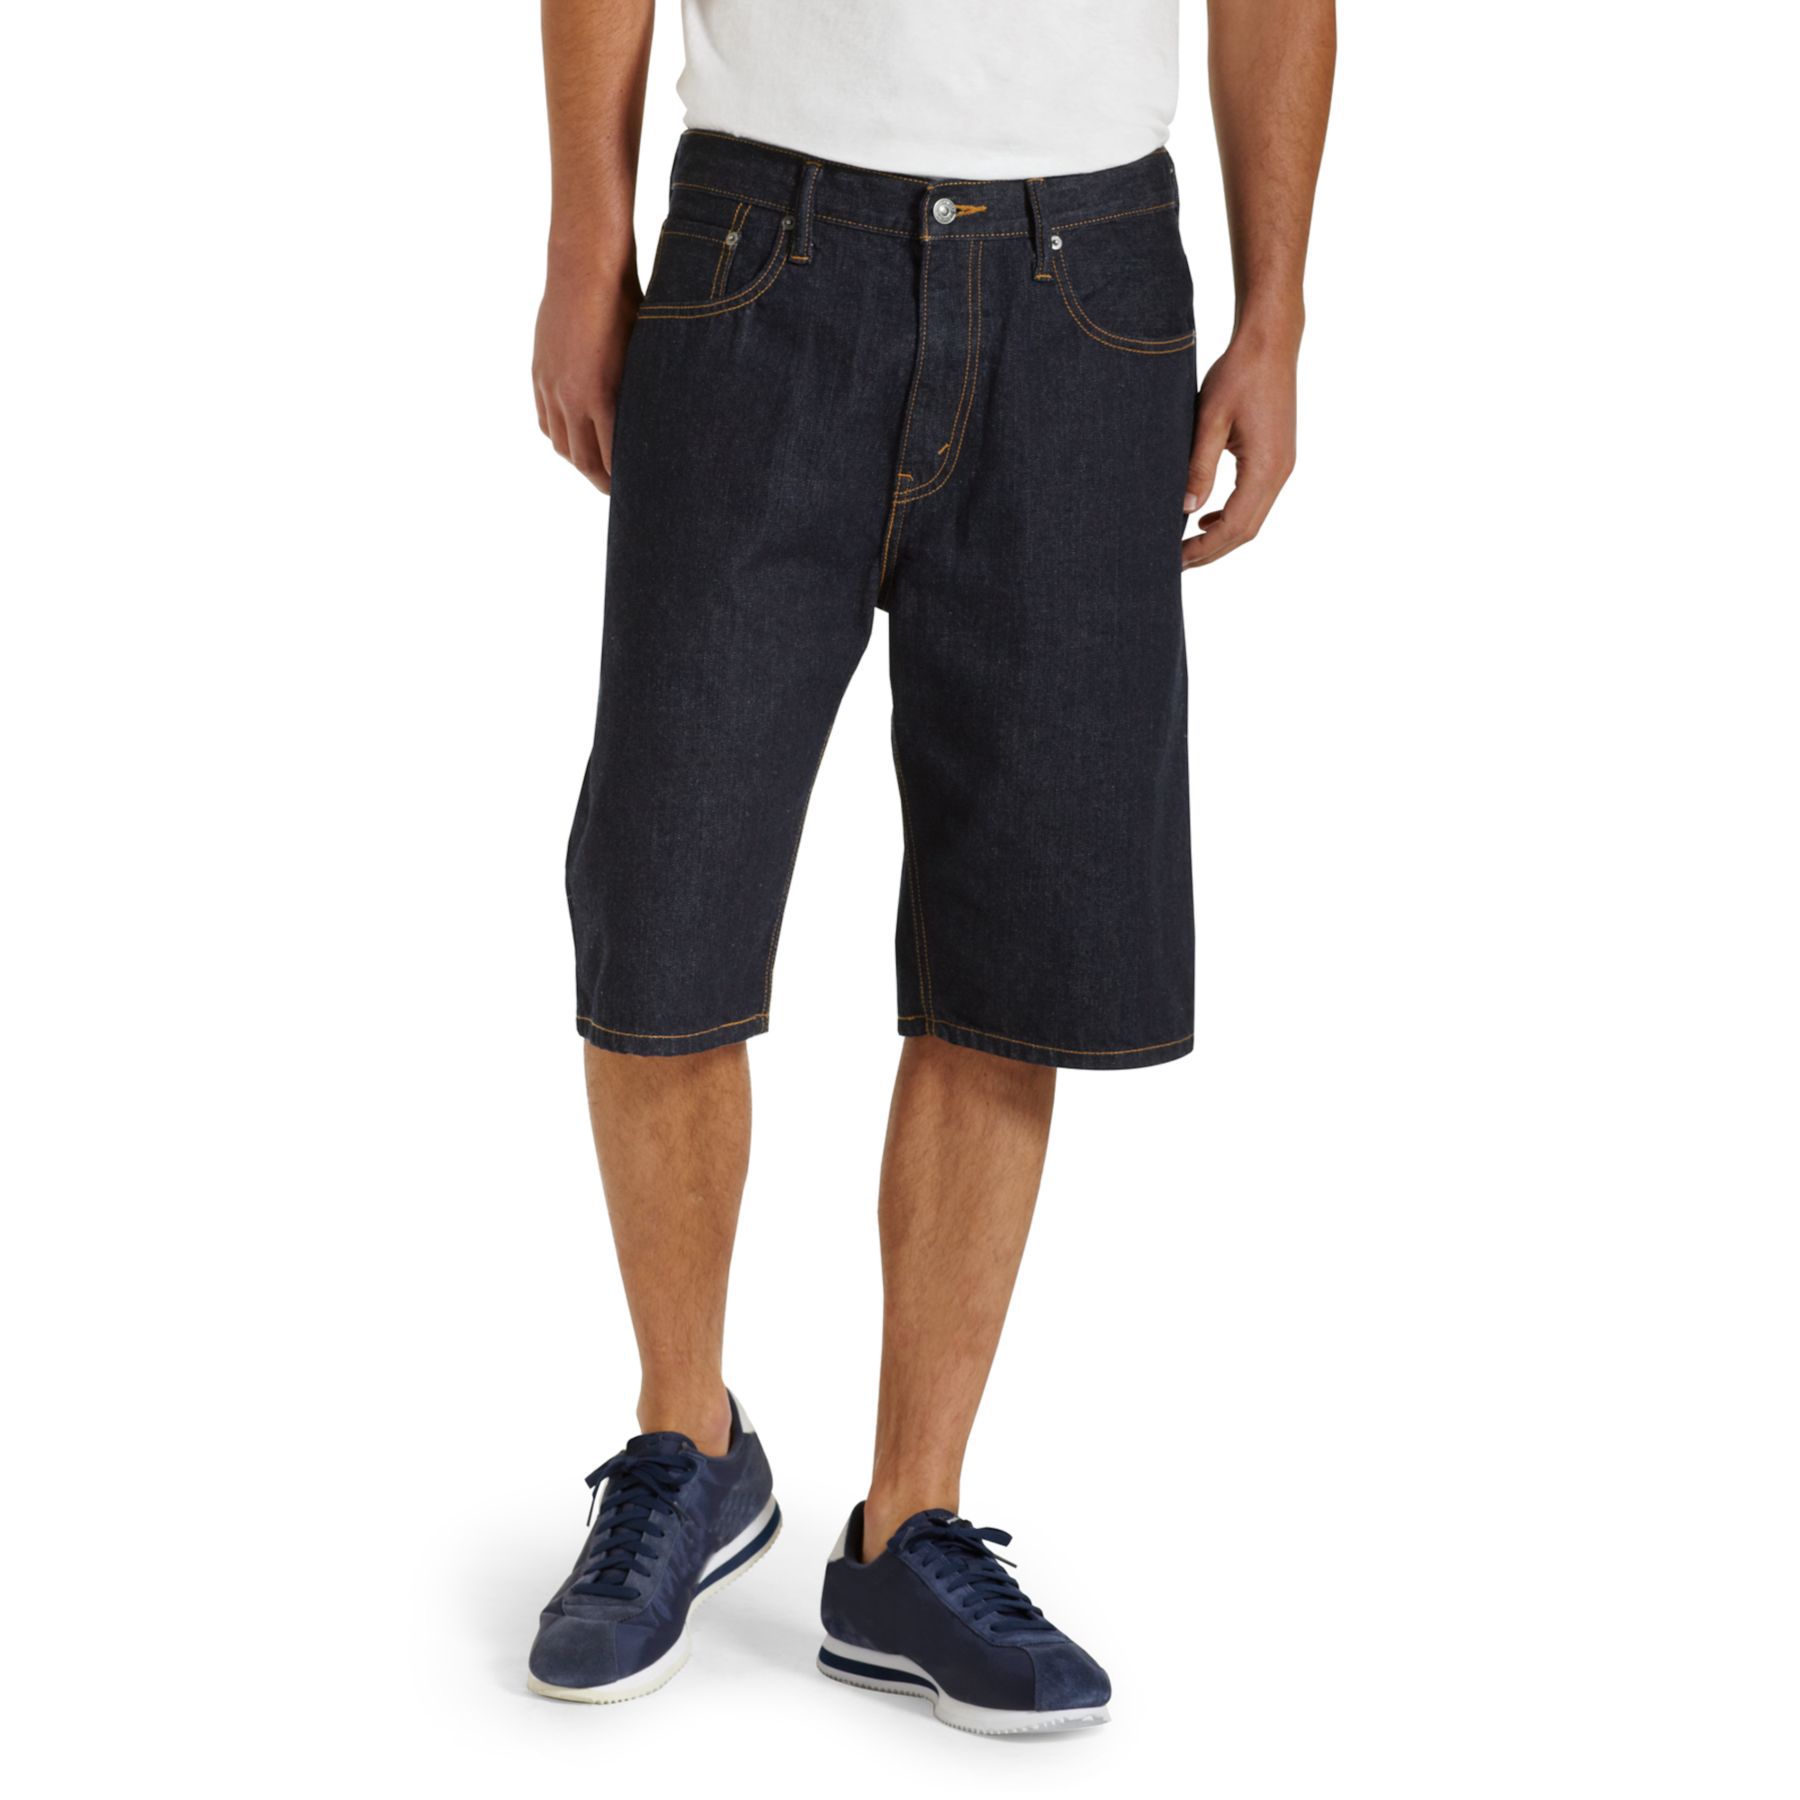 Levi's Men's Loose and Straight Fit Denim Shorts